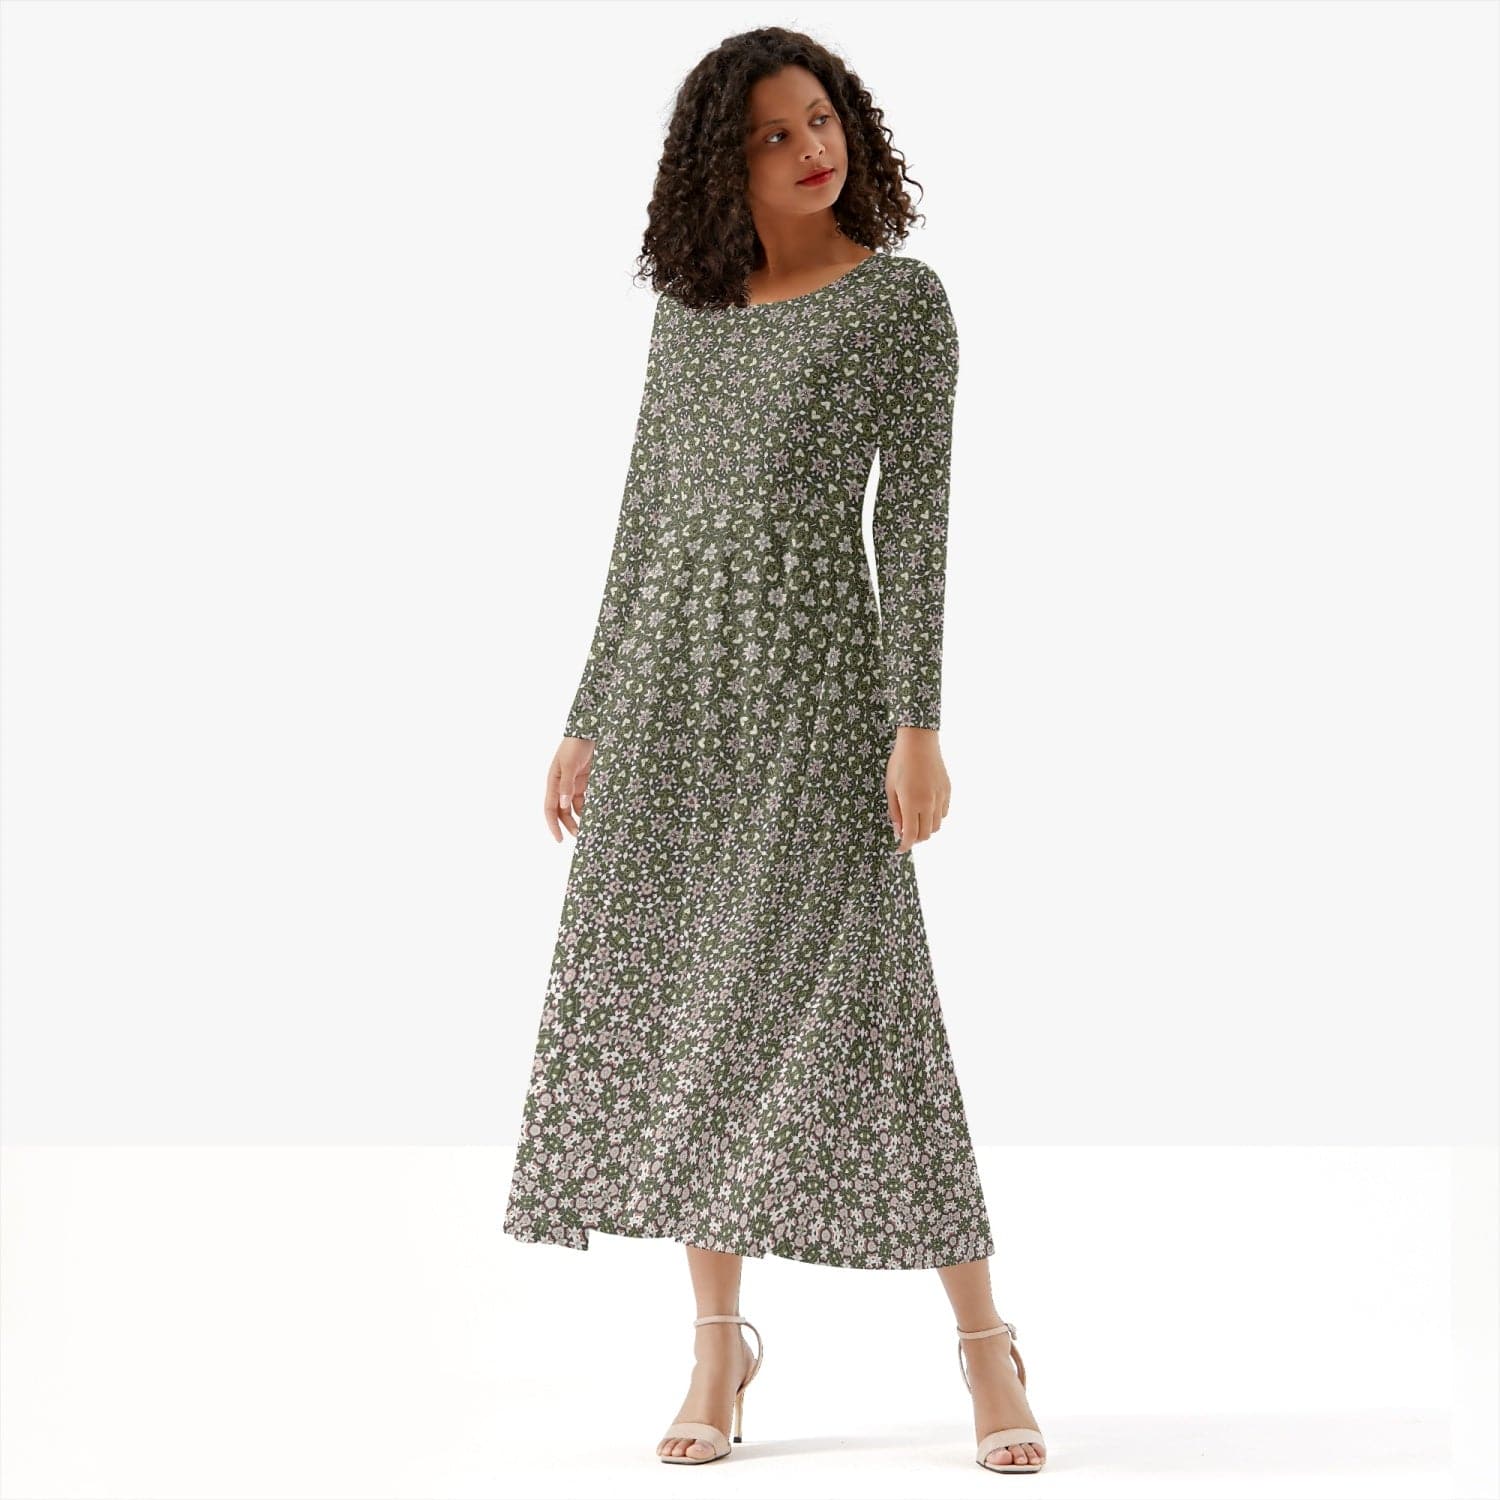 White lilie in Green rosy pattern, Stylish Women's Long-Sleeve One-piece Dress, by Sensus Studio Design